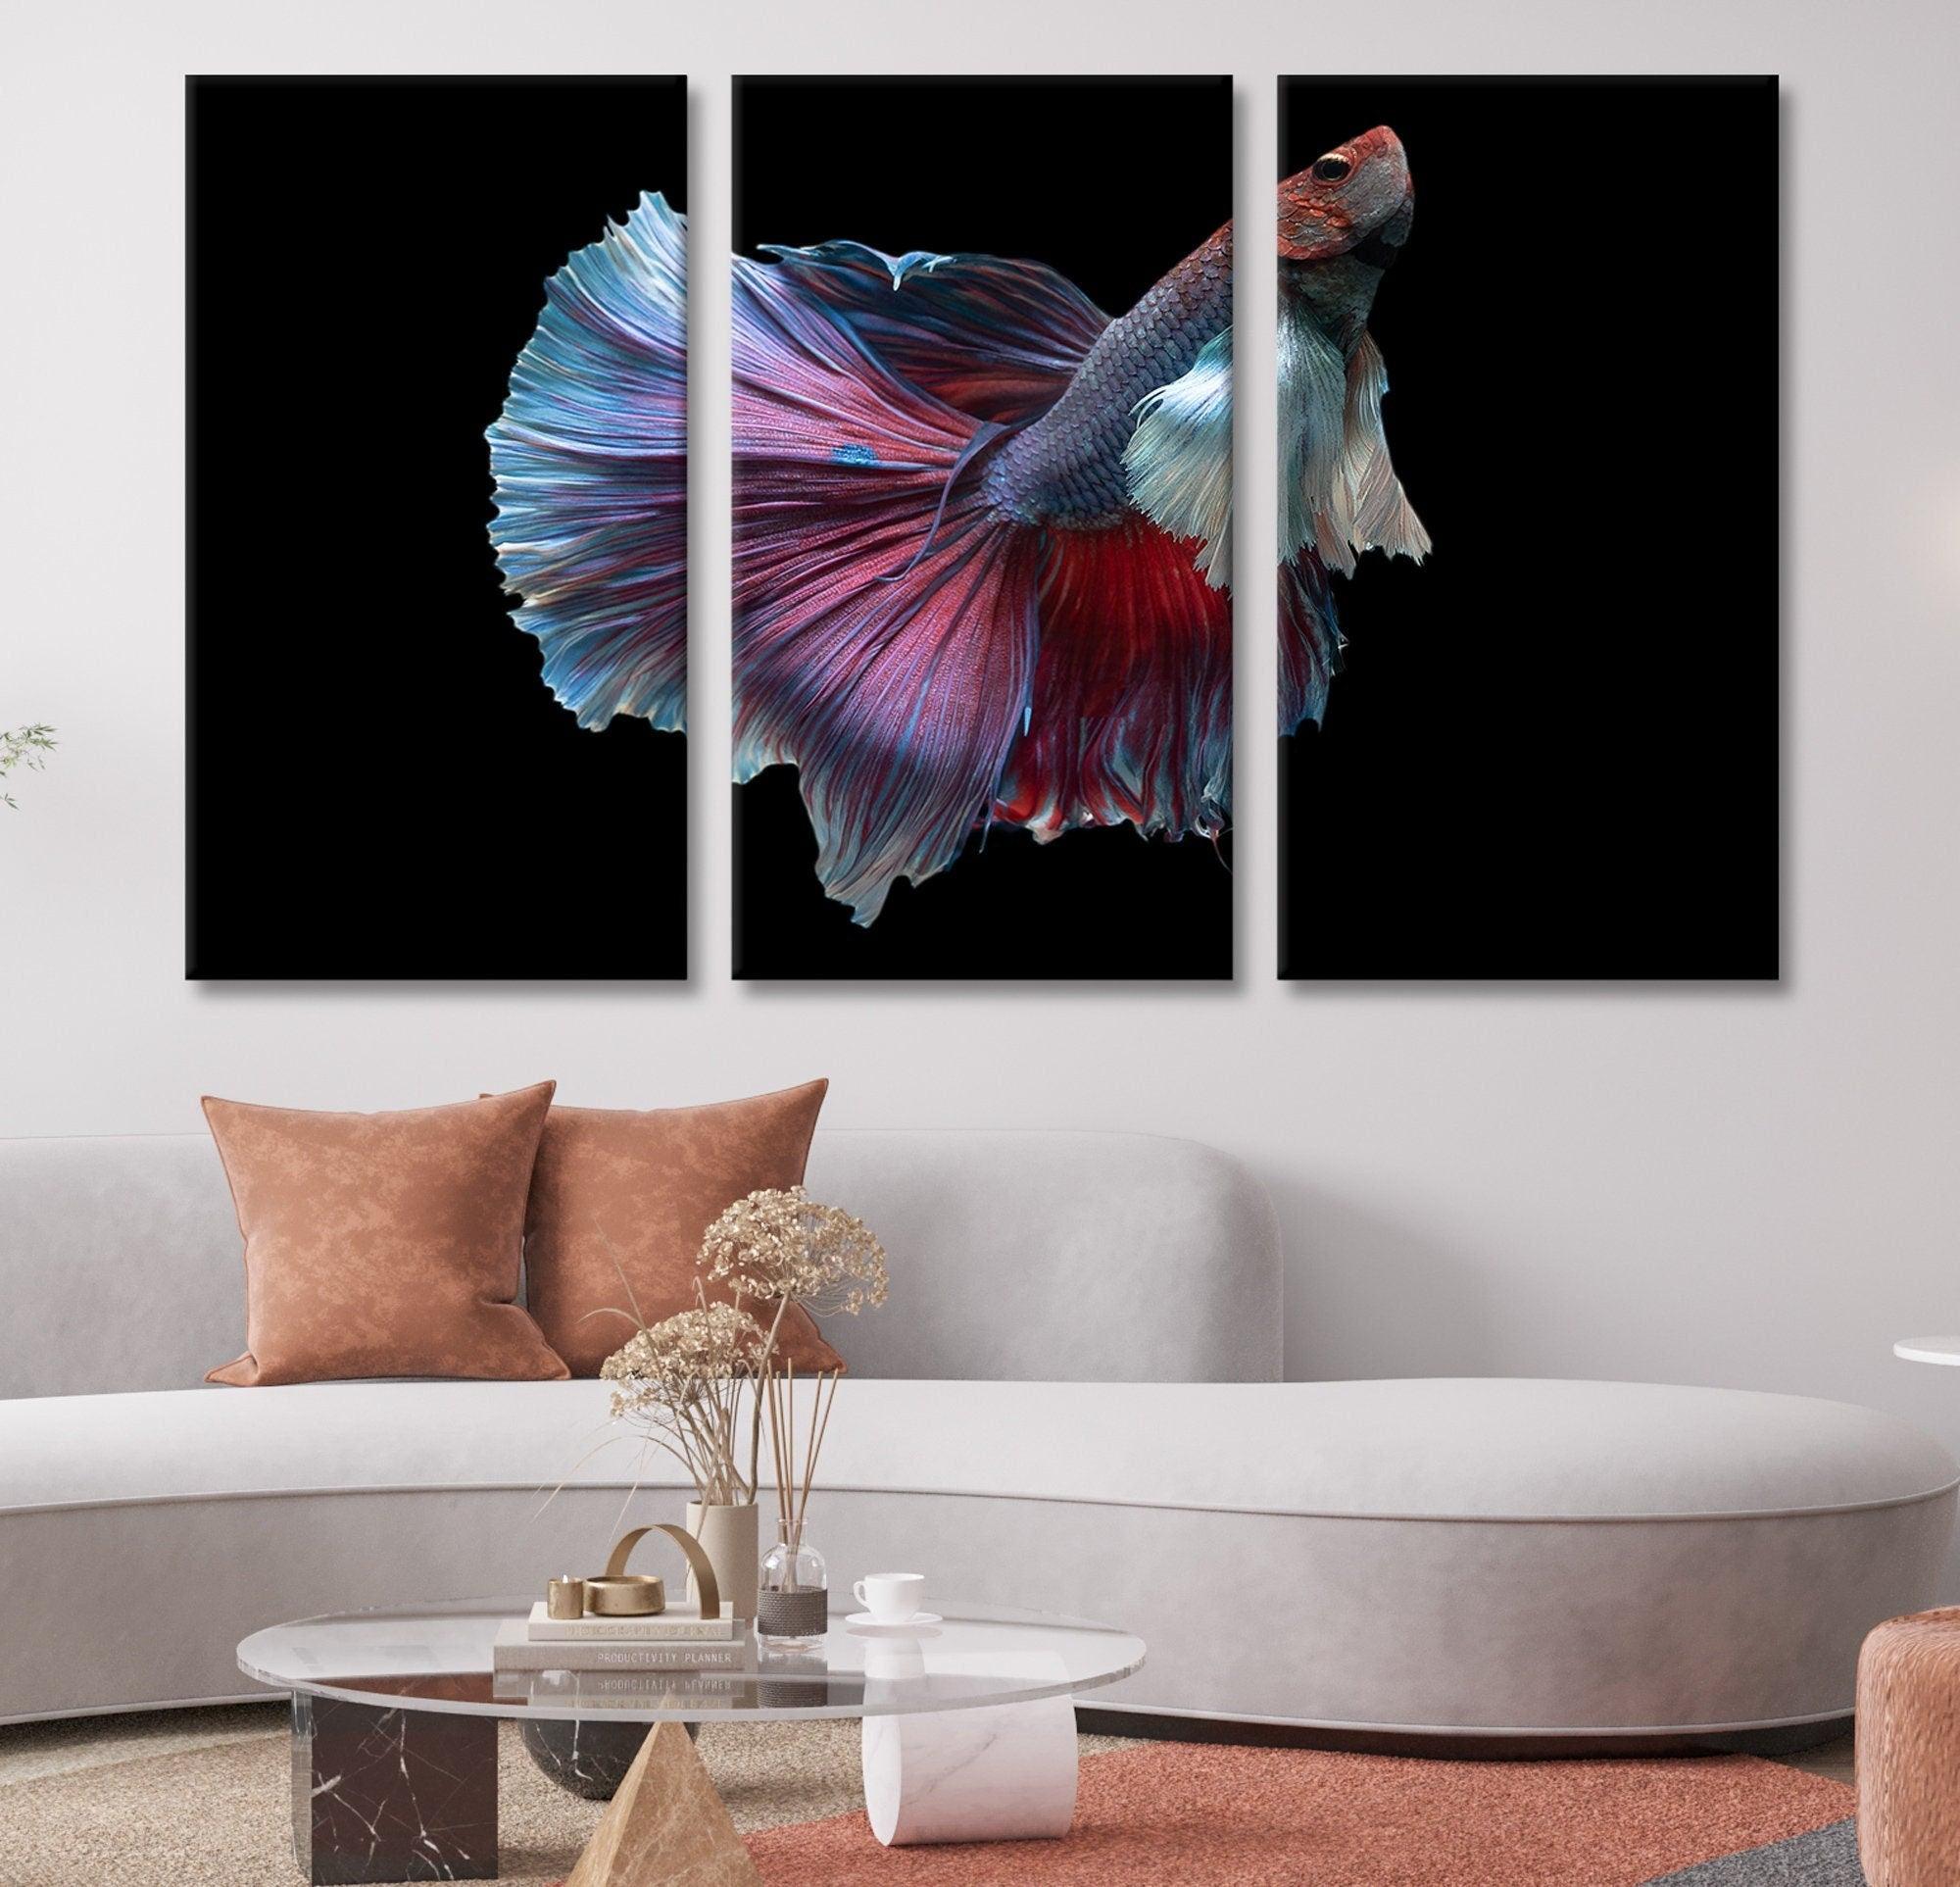 Black Background Wall Art, Betta Fish Decor Canvas Art, Red and white